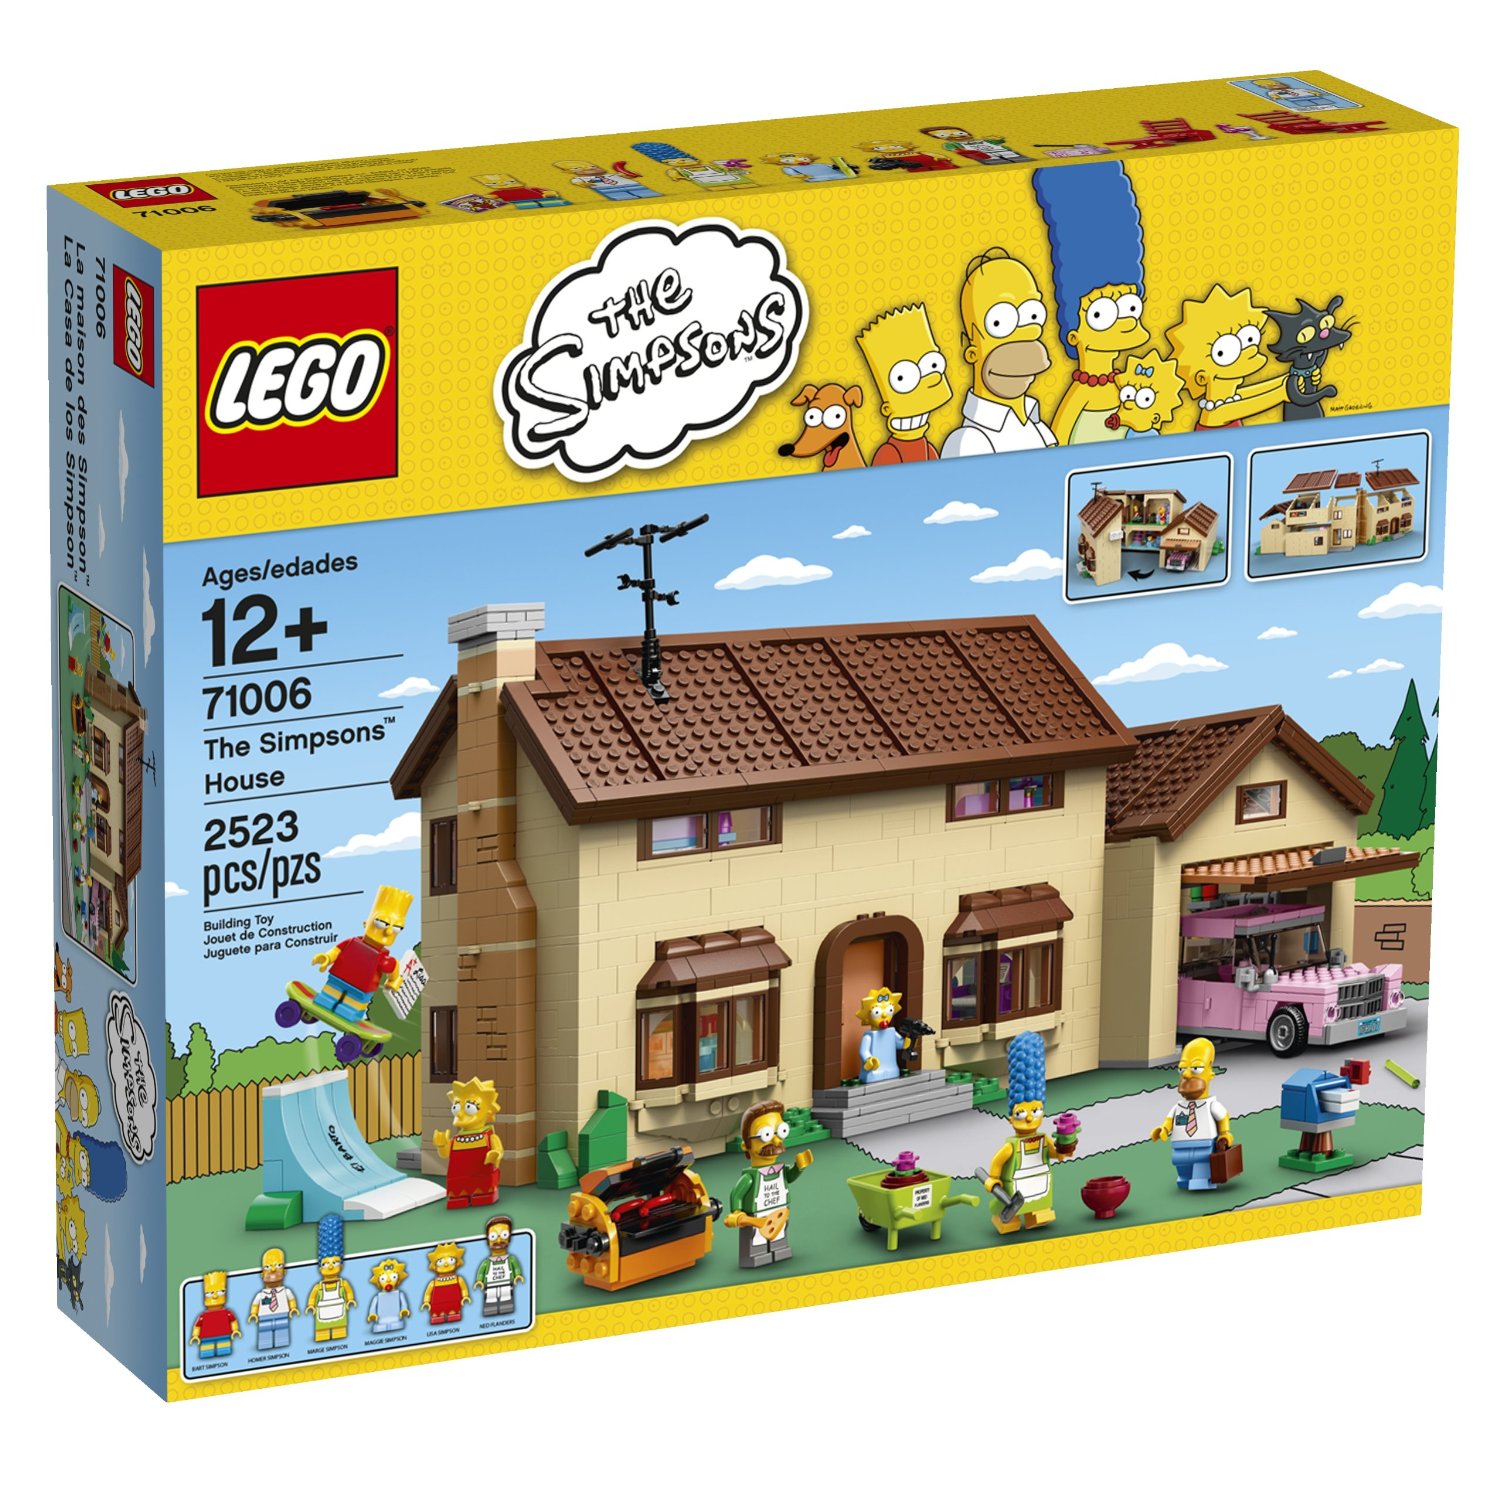 LEGO The Simpsons house / Boing Boing1500 x 1500